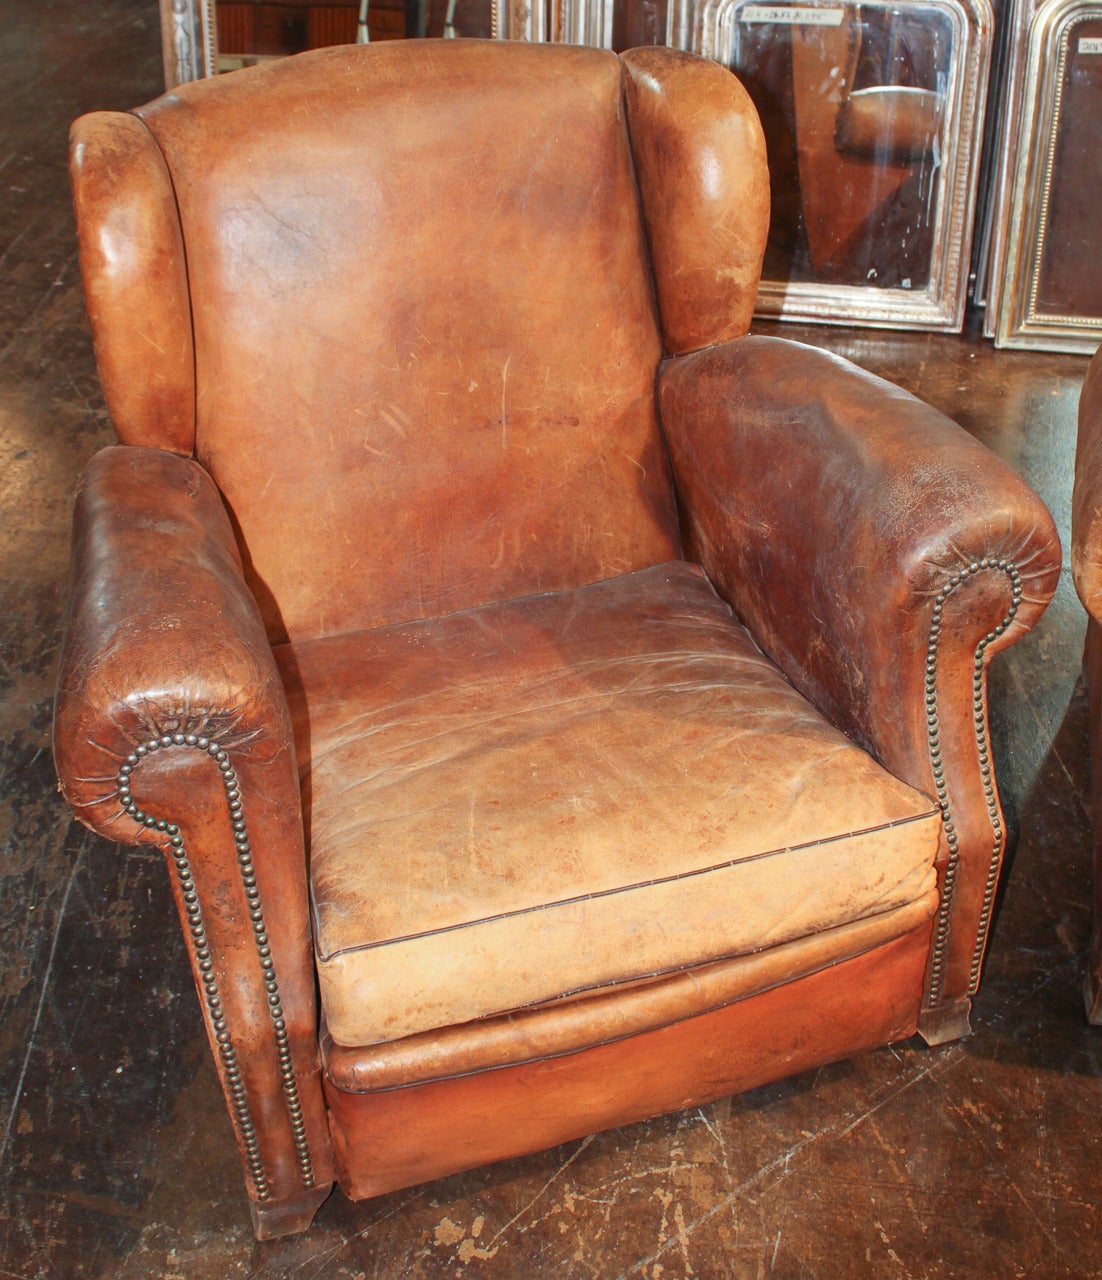 Superb pair of French leather club chairs in rare wingback style. Having larger scale than most, and with handsome aged brown leather. The leather upholstery is faded and consistent with age and wear; there are no tears or holes. Please view all